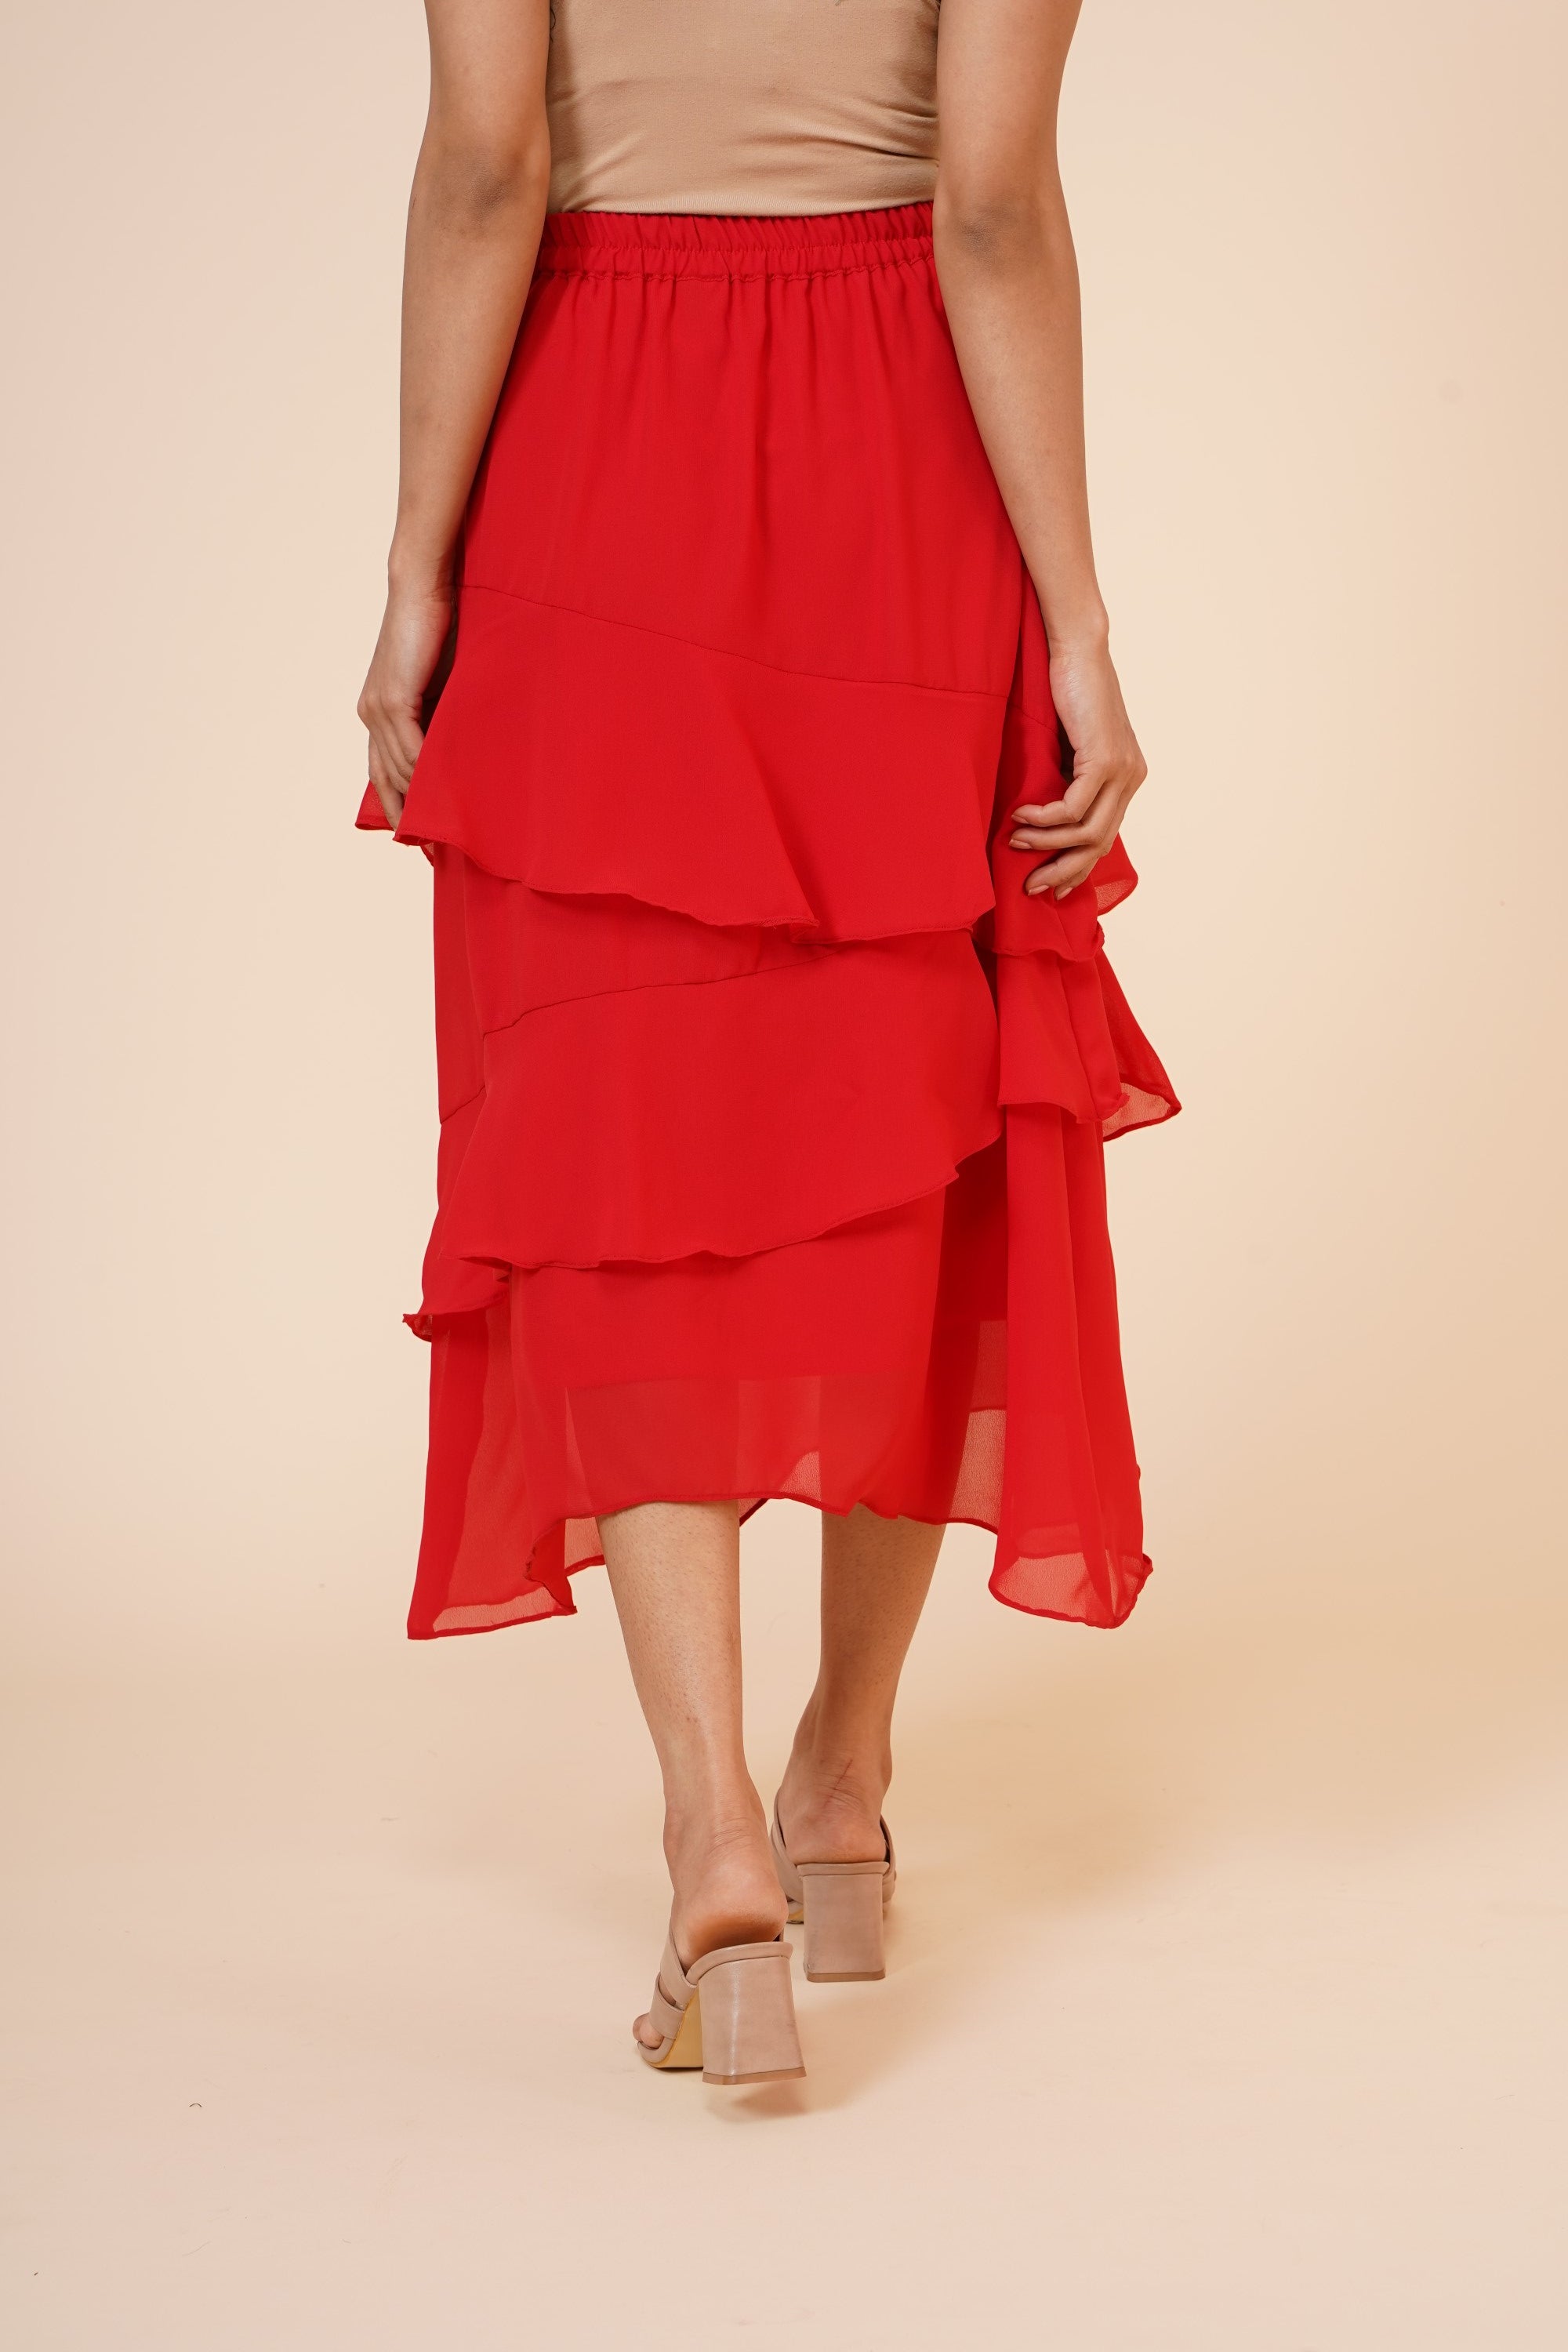 Women's Chiffon Ruffle Skirt With Elastic In Red  - MIRACOLOS by Ruchi